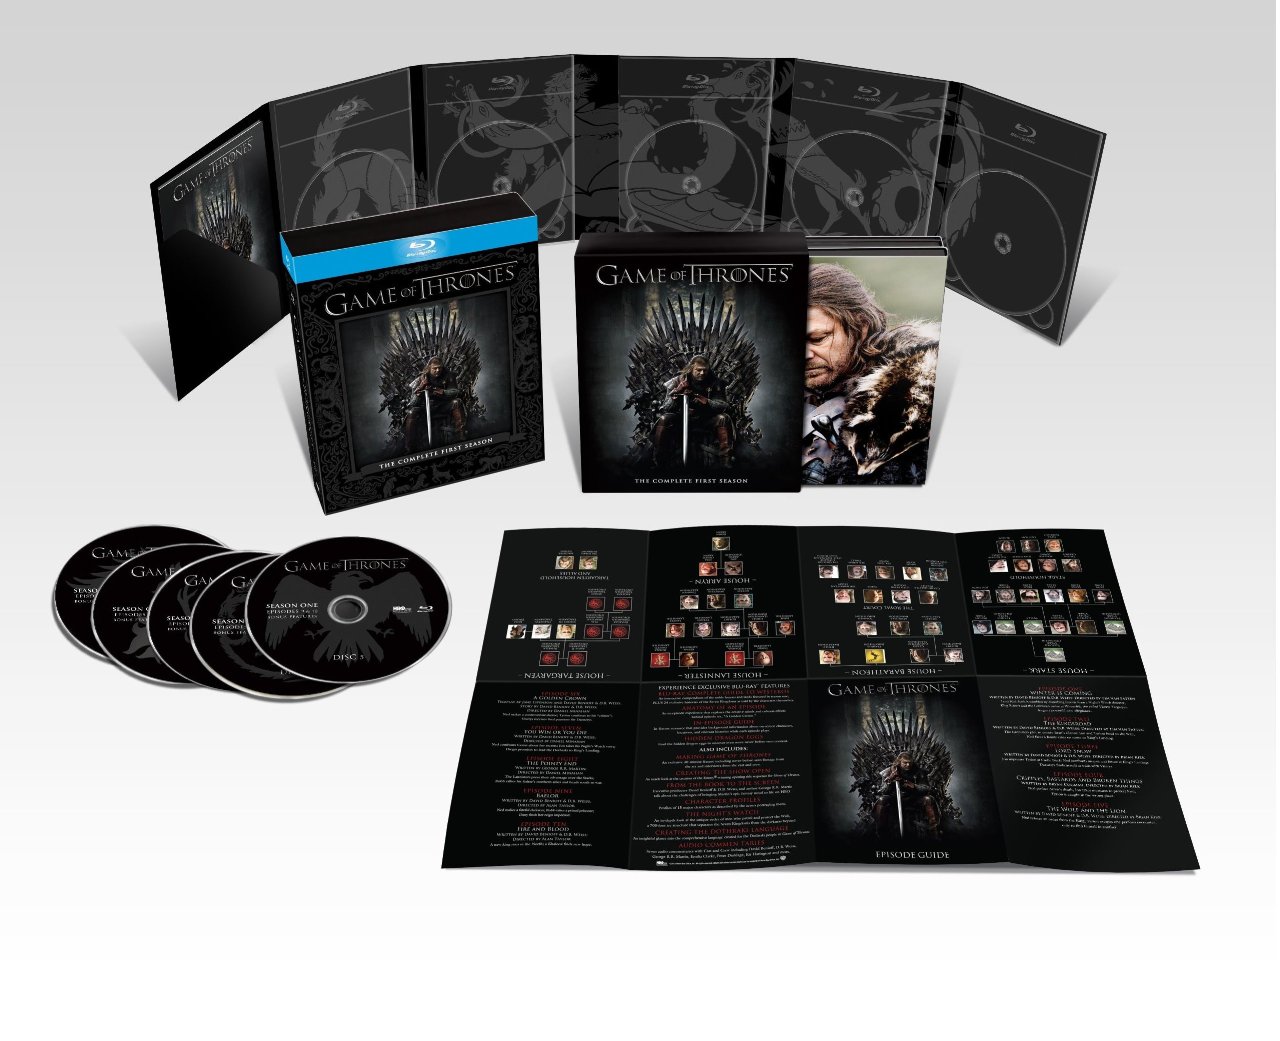 Watch Game of Thrones on DVD & Blu-Ray - HBO Watch